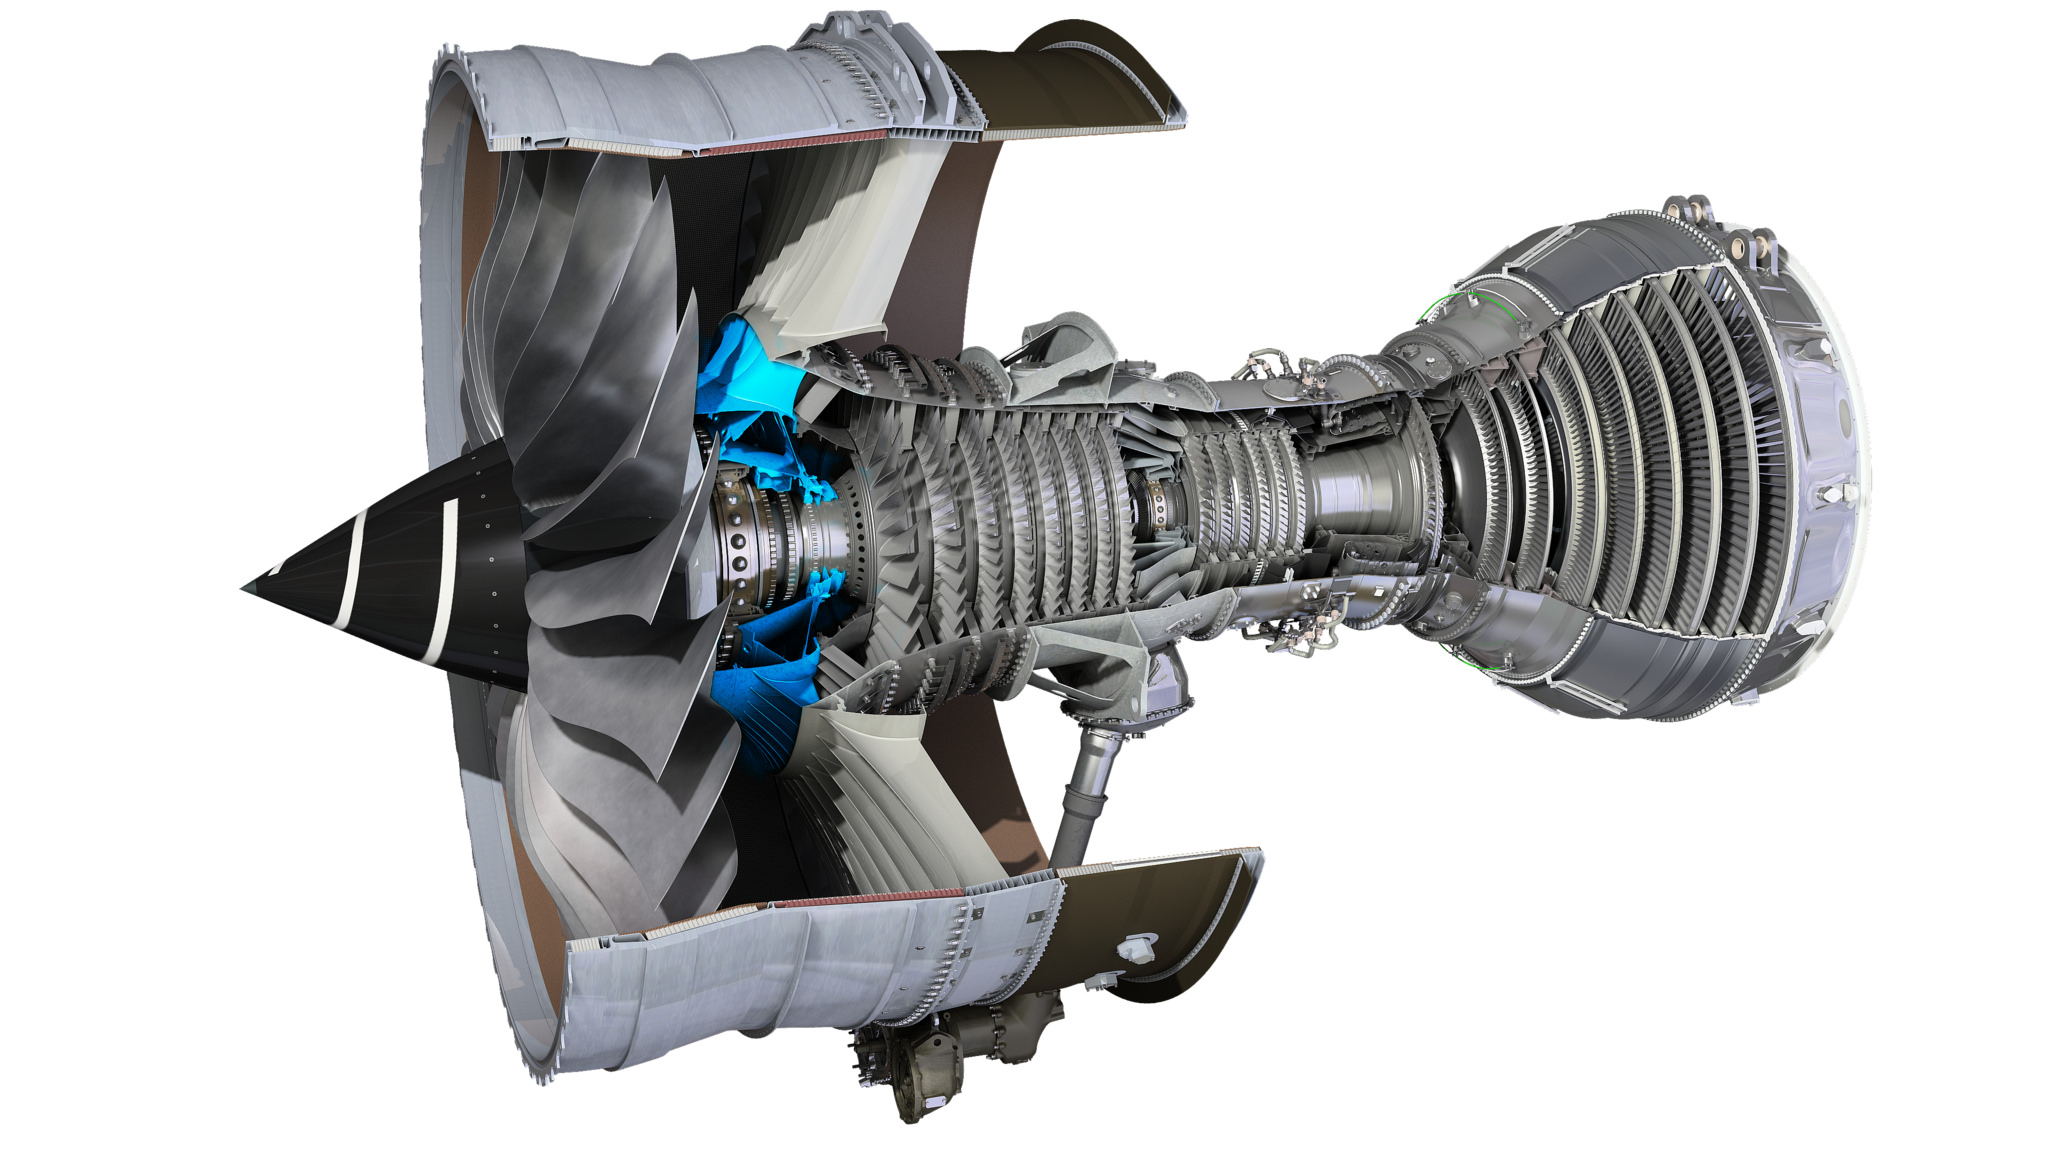 Trent XWB cut away showing position of the front bearing housing (in blue) which Rolls-Royce has produced using 3D printing.